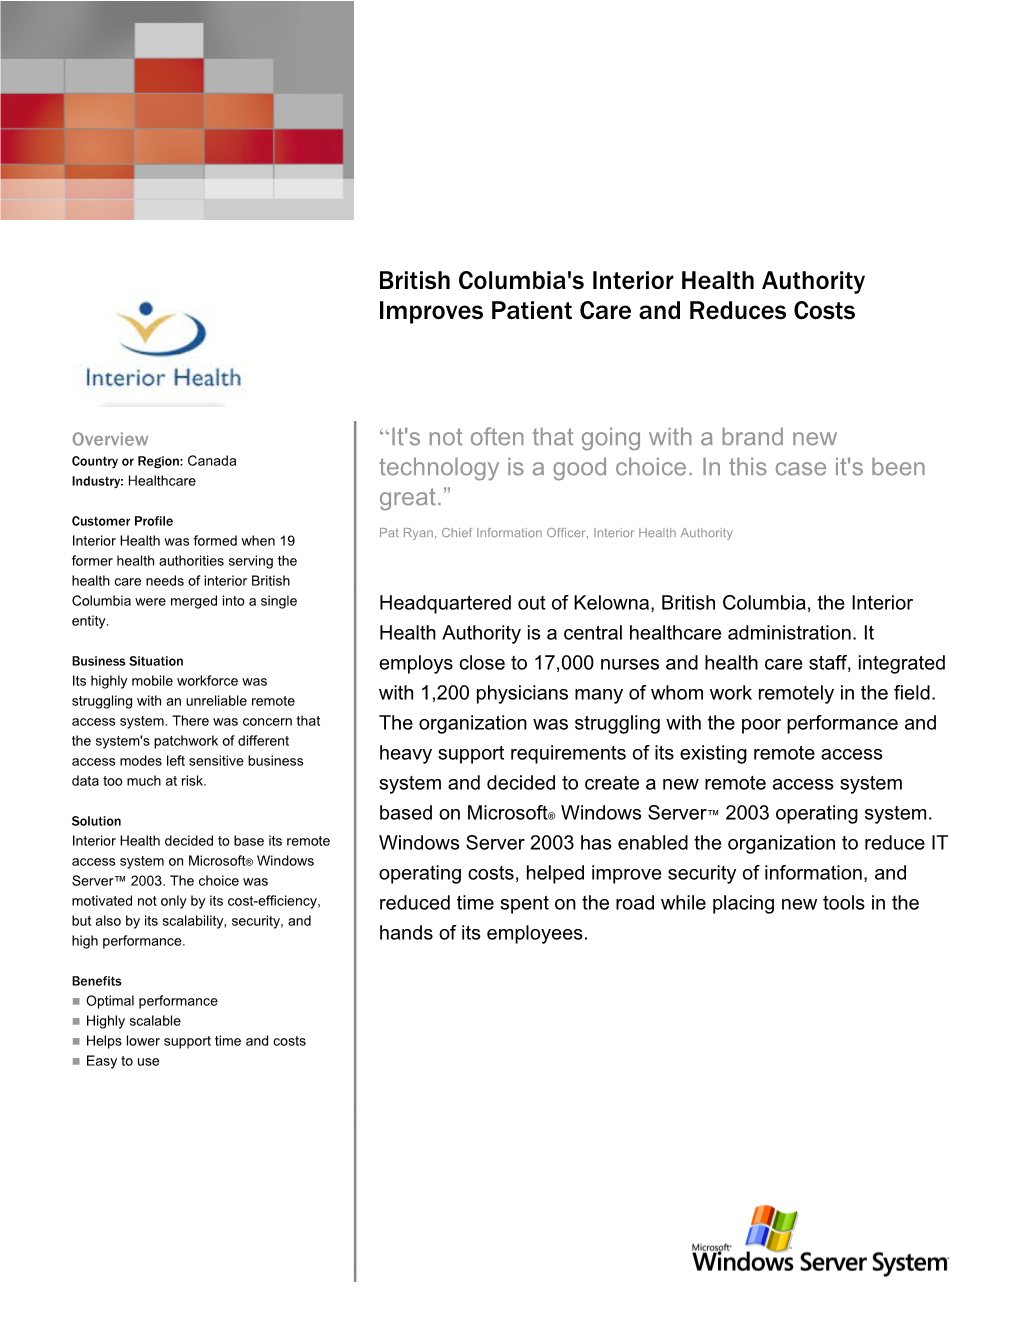 British Columbia's Interior Health Authority Improves Patient Care And Reduces Costs